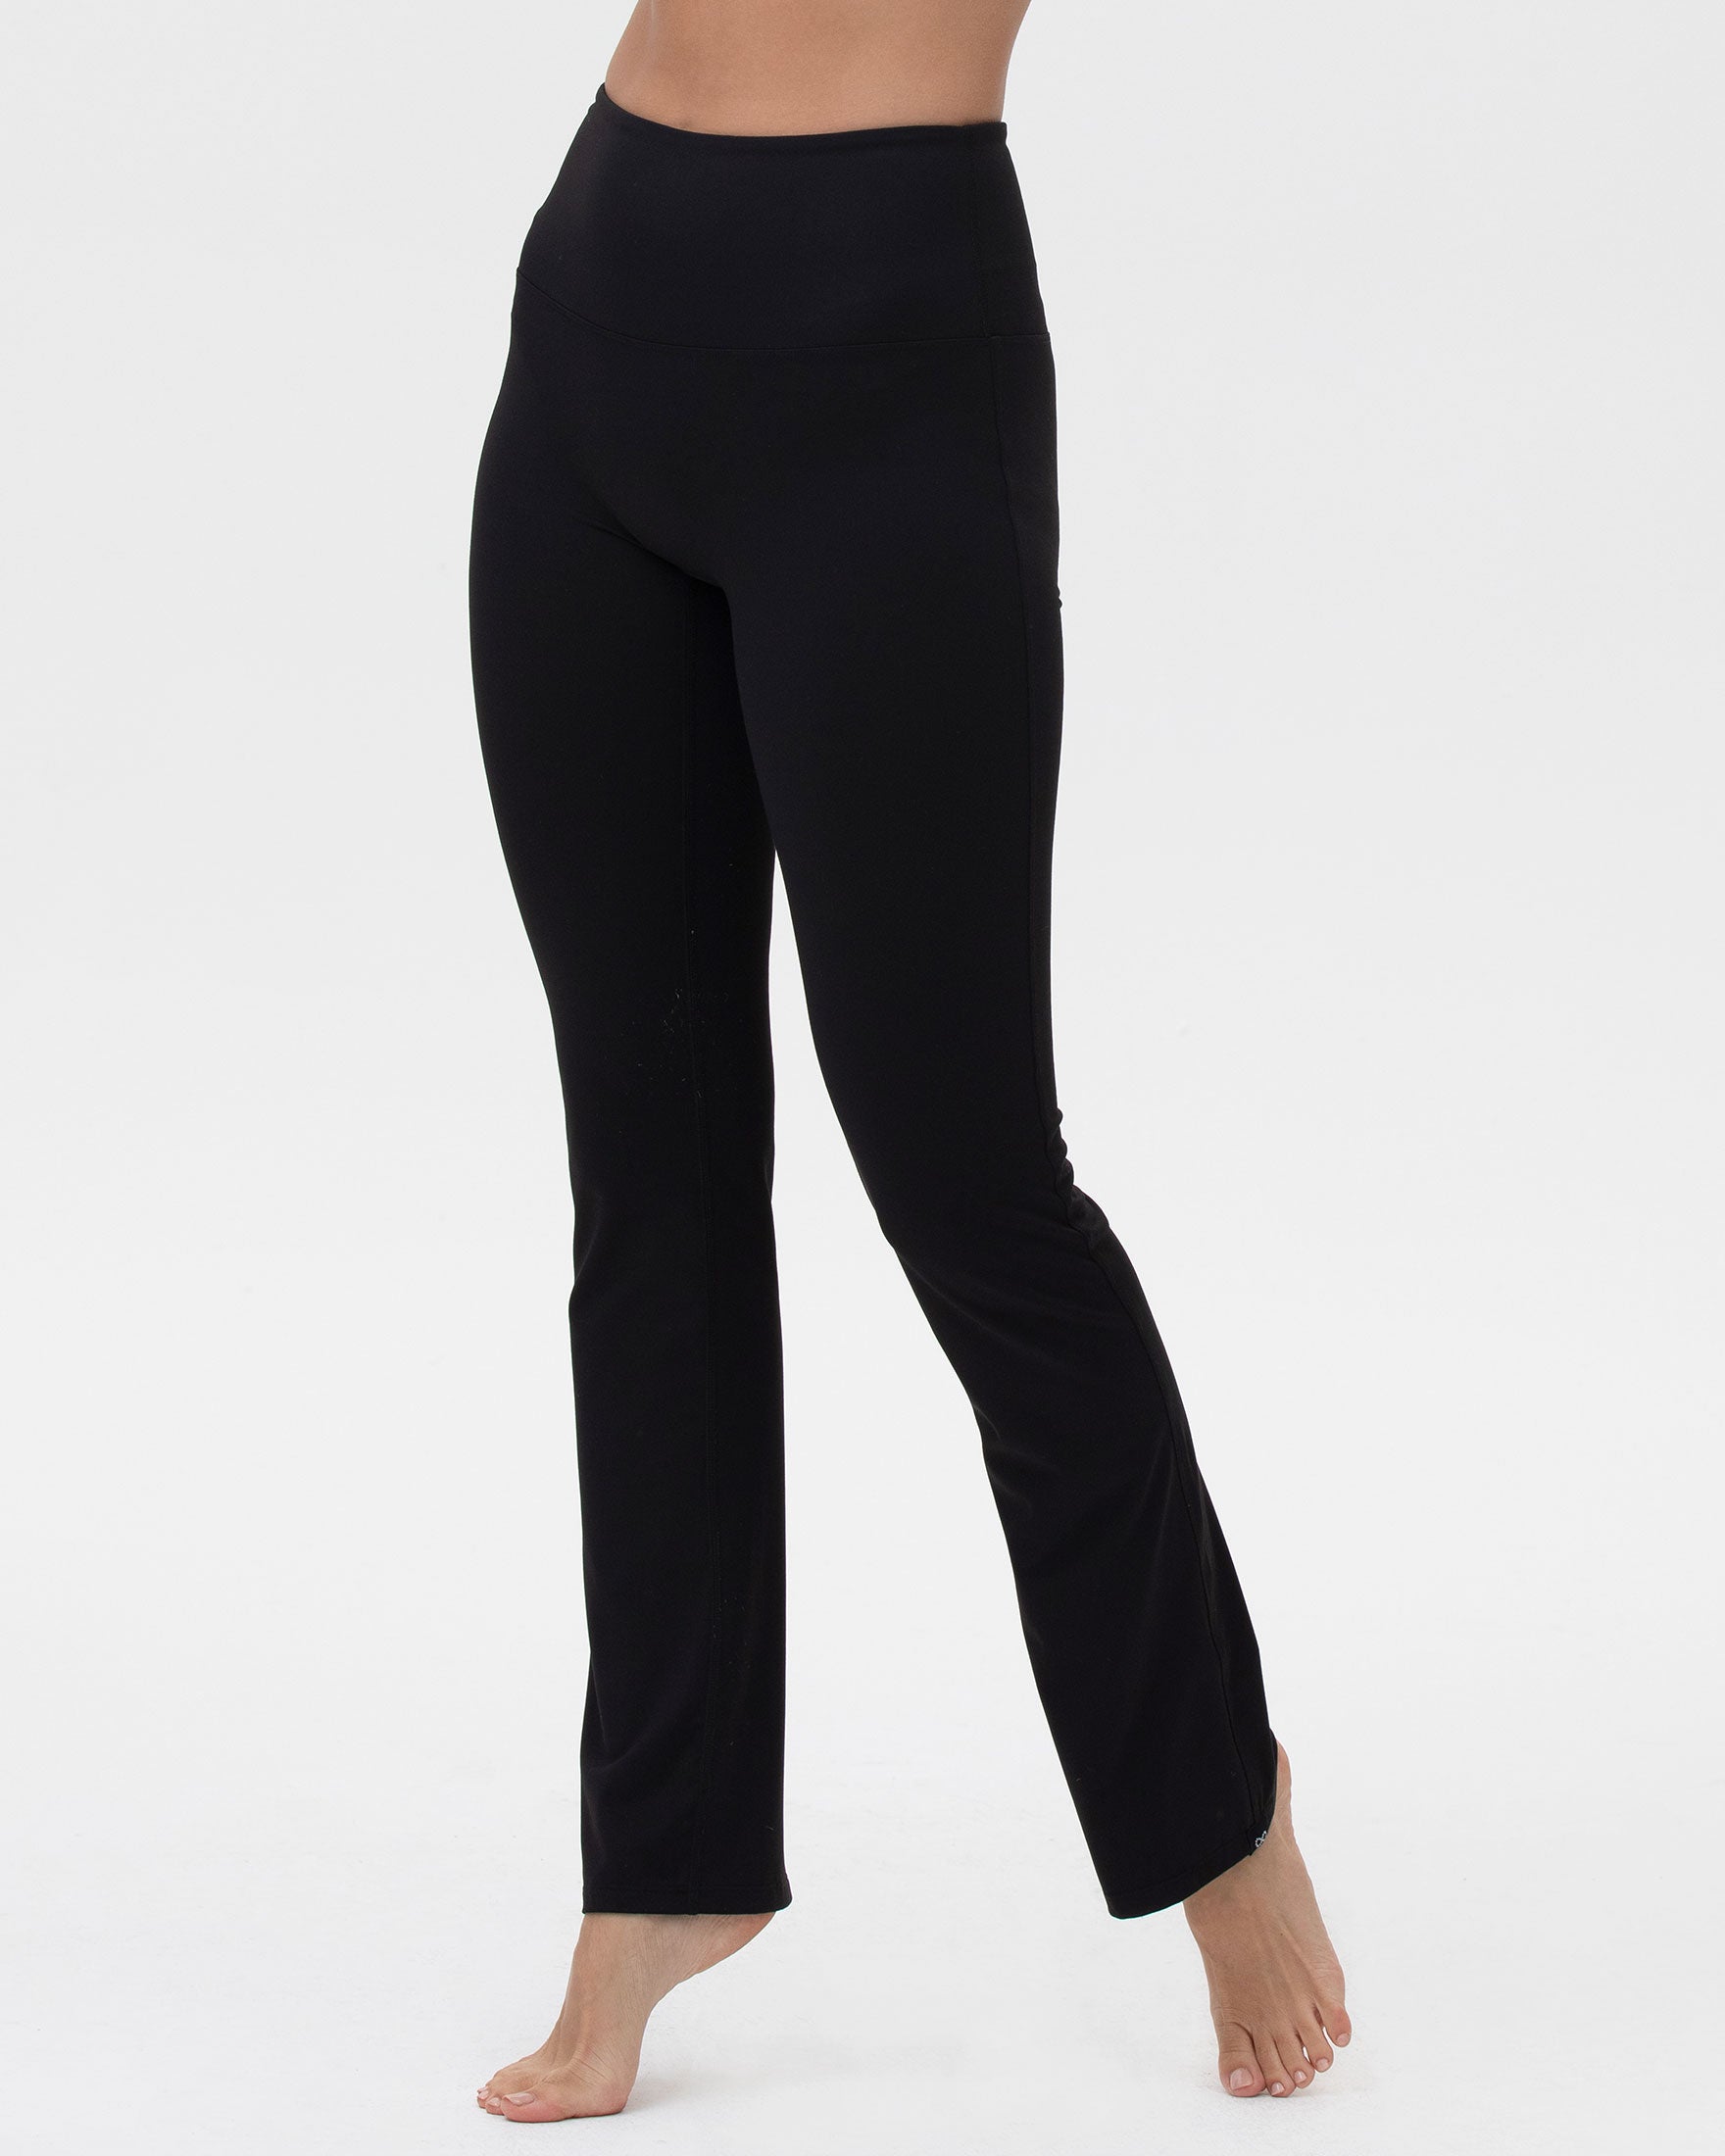 Womens High Waisted Bootcut Beyond Yoga Flare Pants With Crossover Design  And Bell Bottom For Workout And Lounge From Lqbyc, $34.16 | DHgate.Com